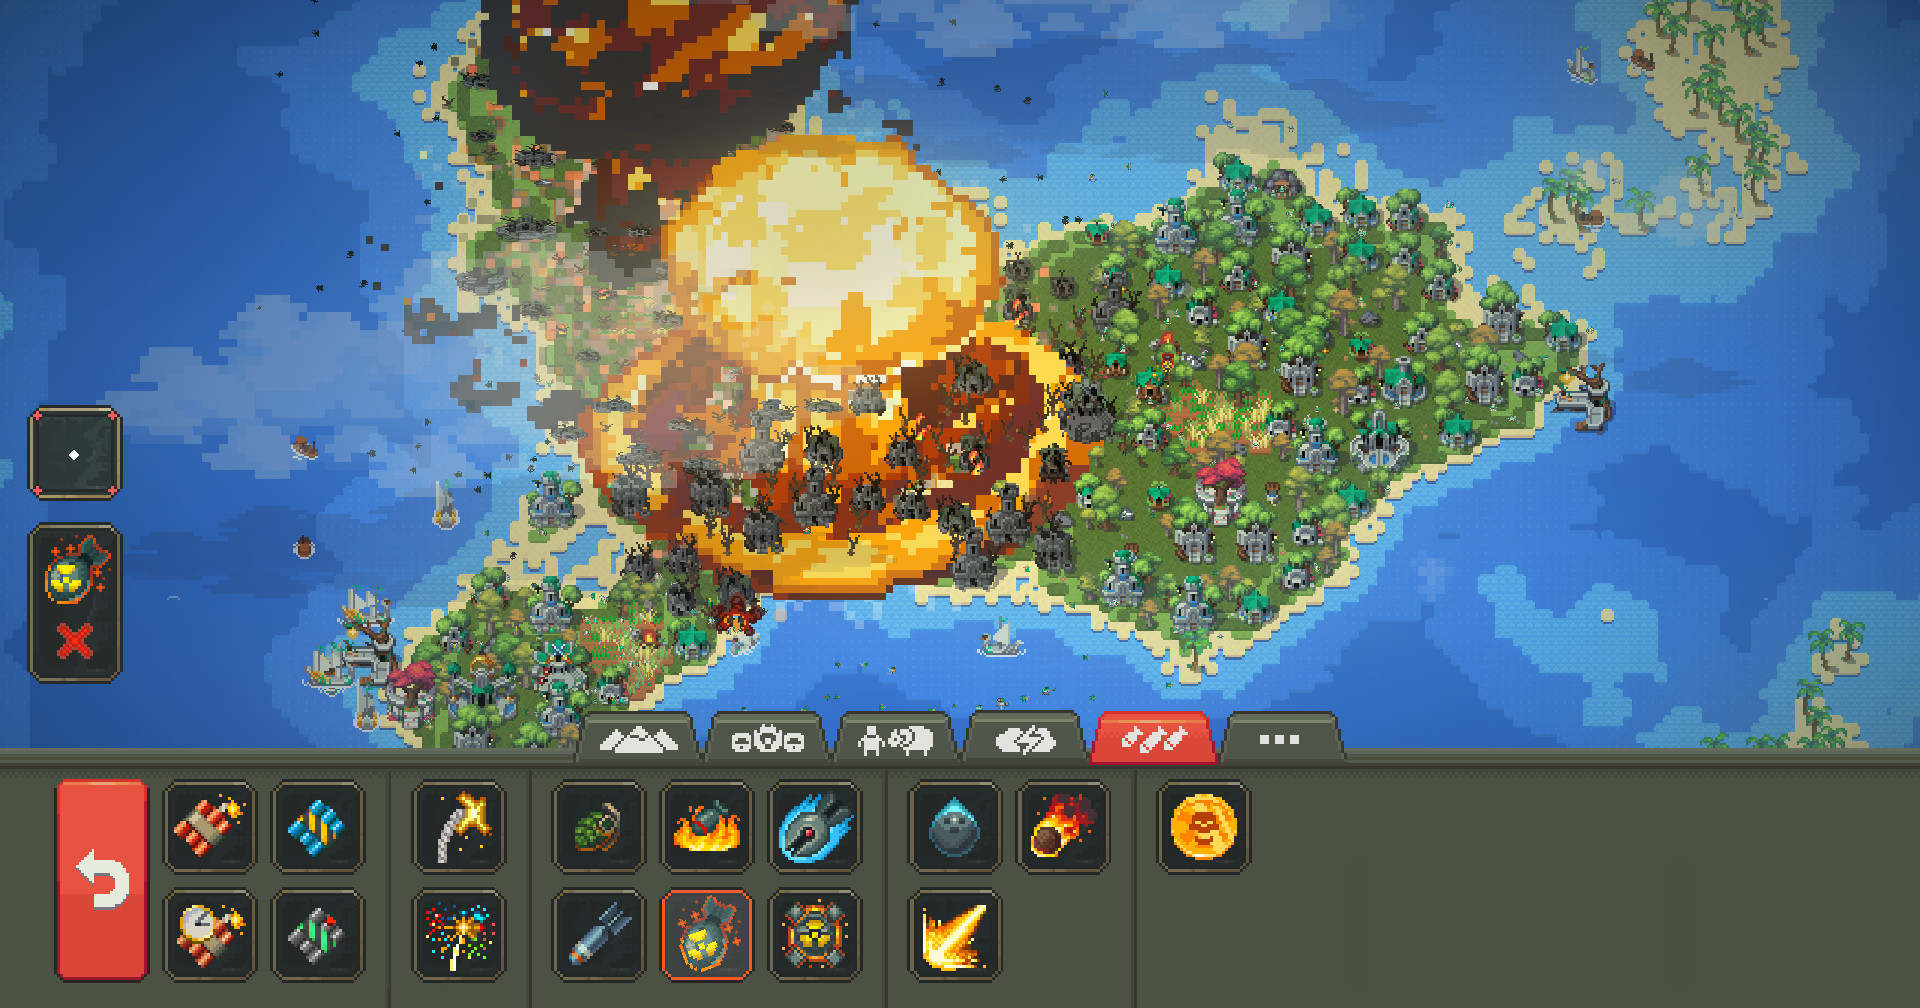 Use the best traits and mods to be even more effective as a God in Worldbox. Here we see a nuke explosion on an island.